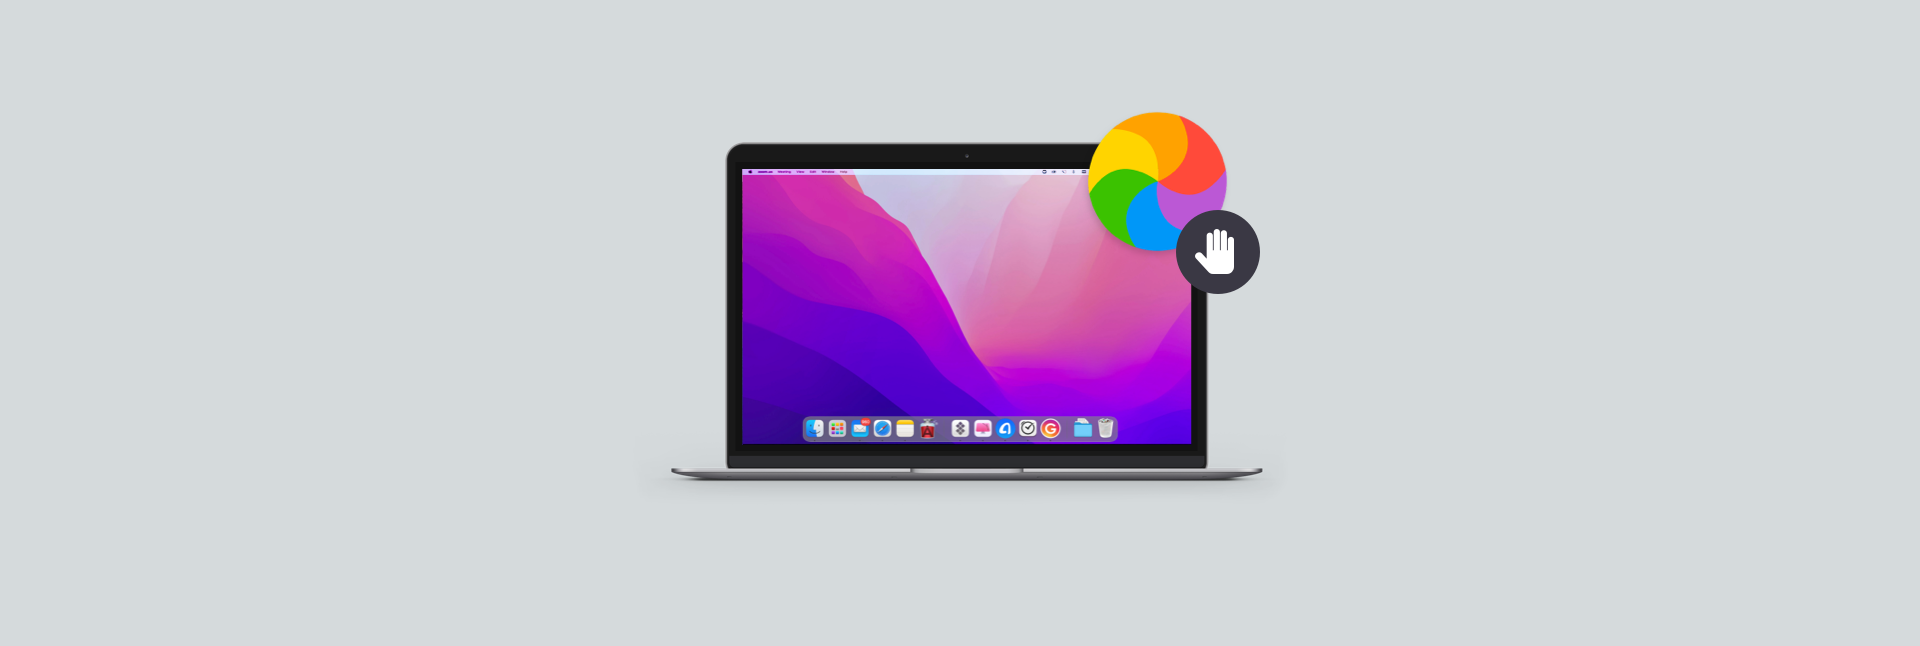 how to stop imac spinning wheel non responsive